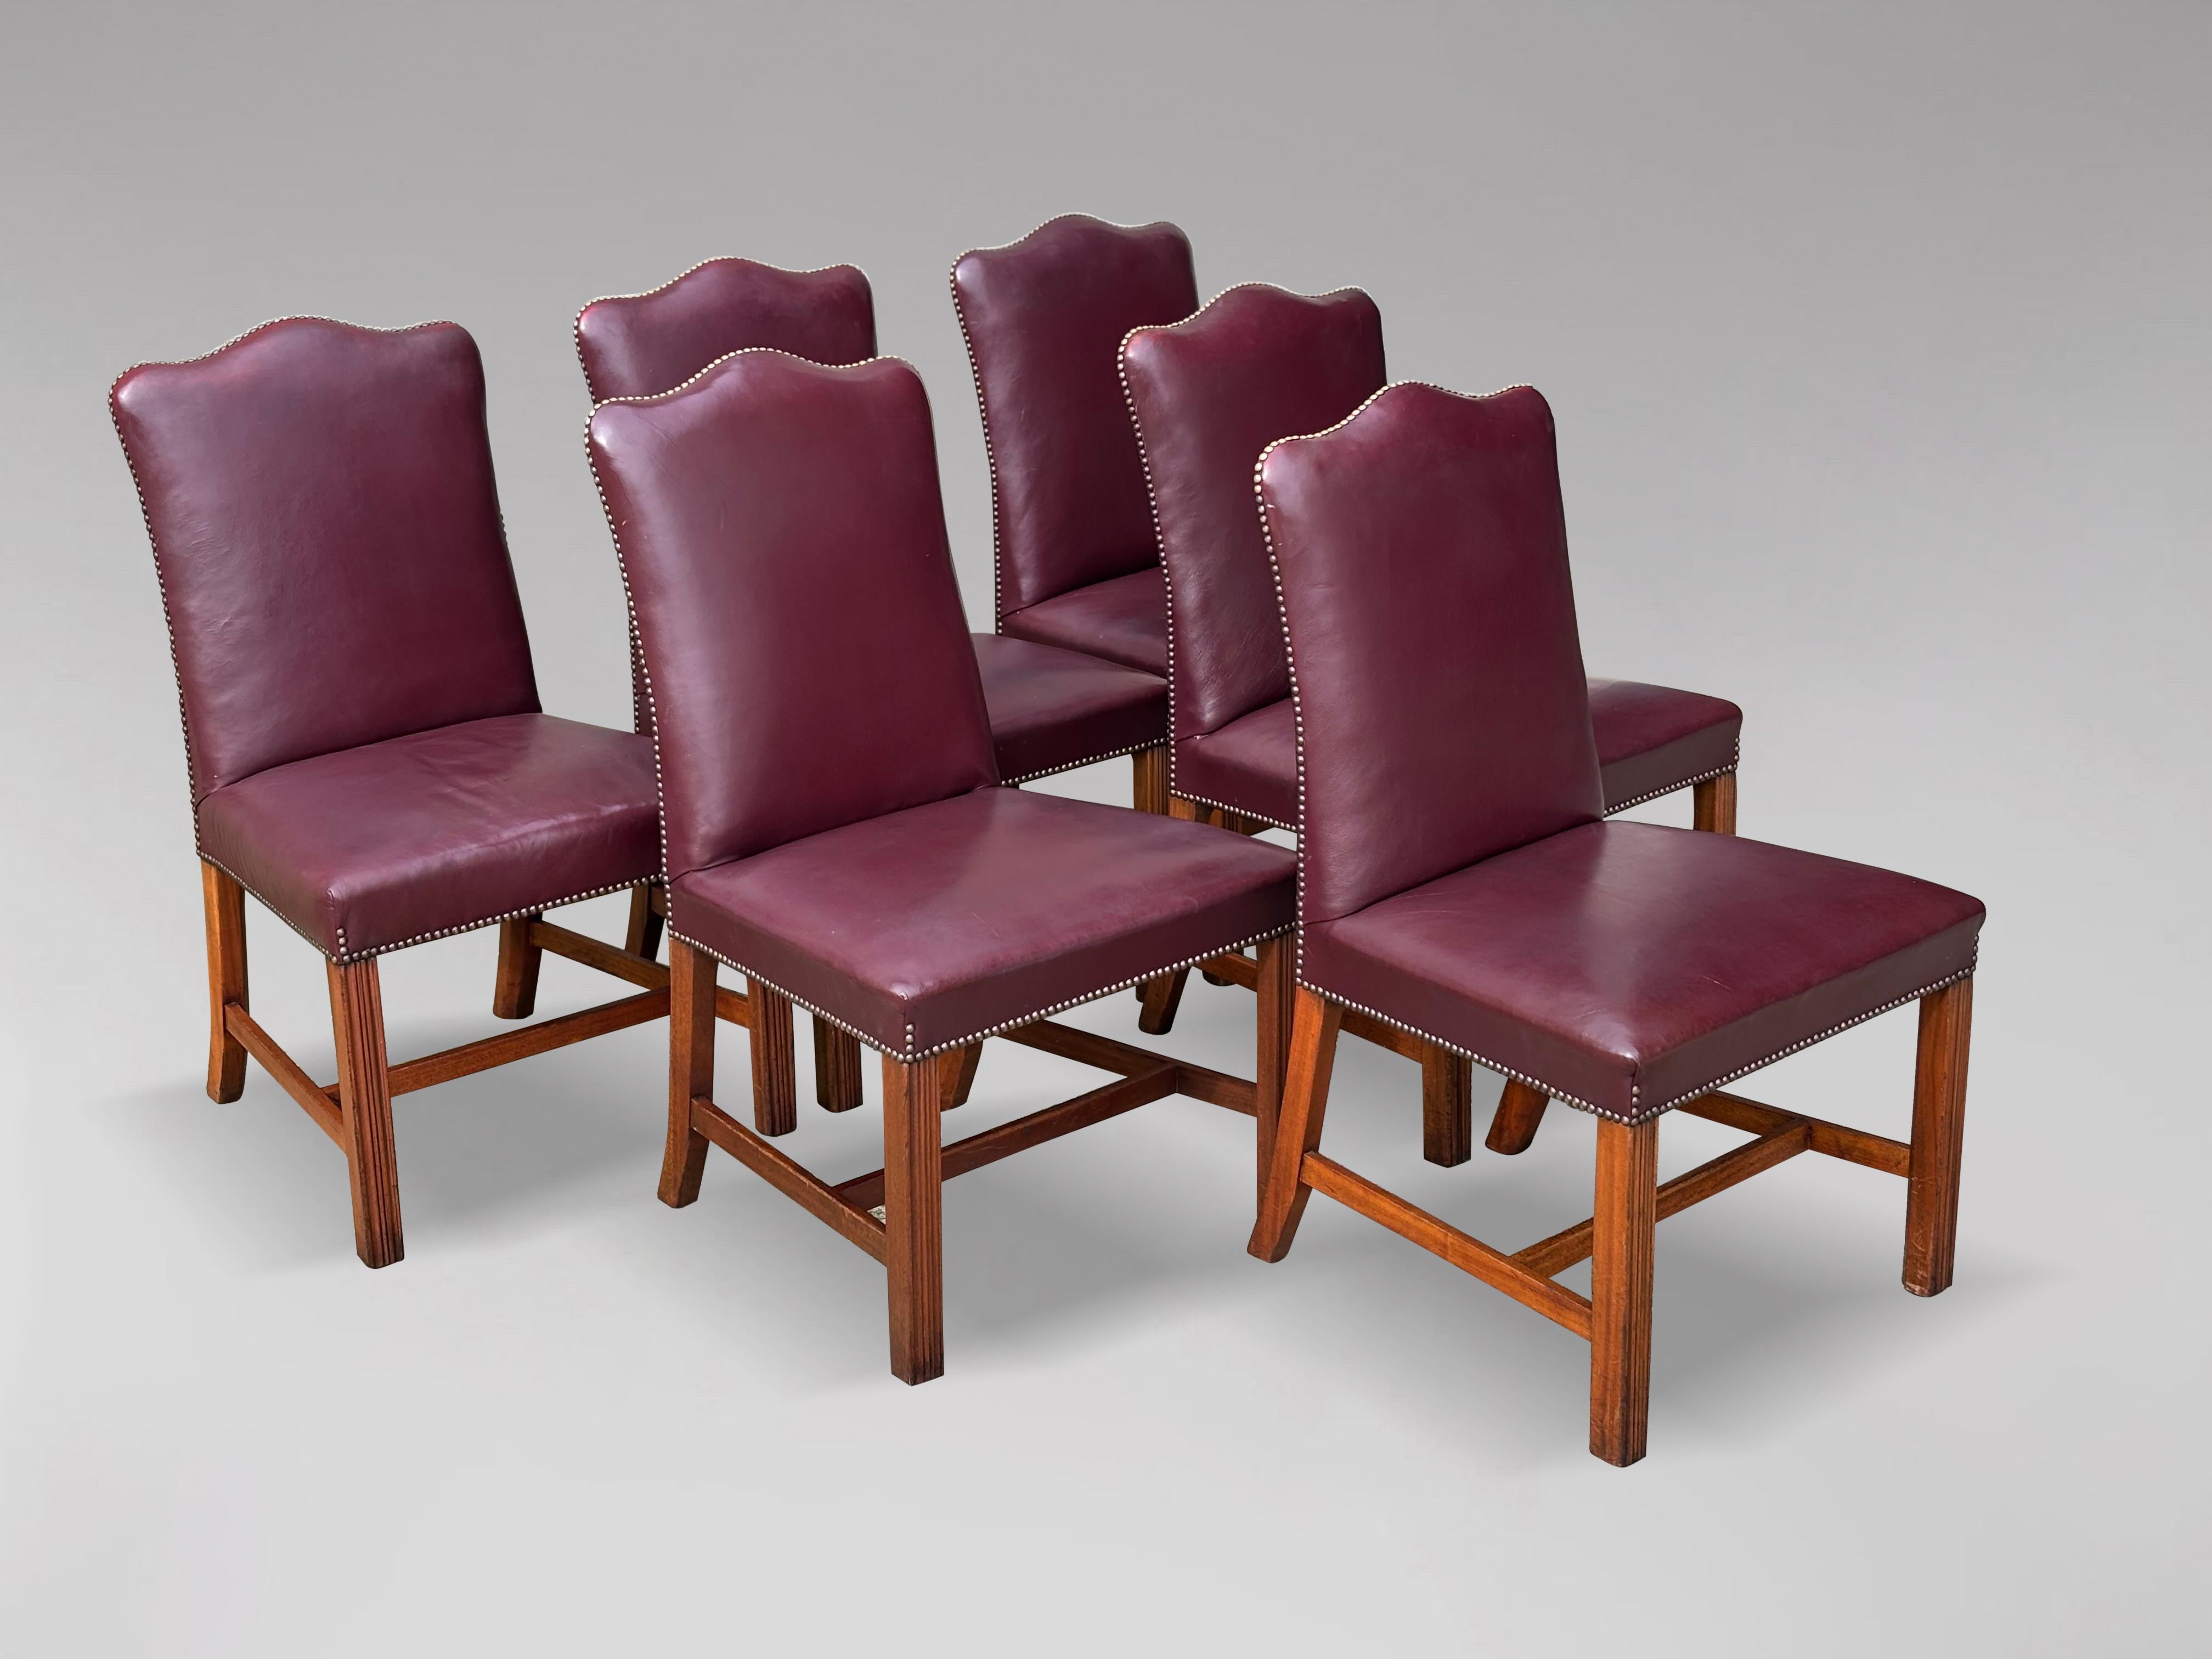 A great quality set of 6, George III style leather upholstered dining chairs. Solid and supremely comfortable high back chairs with arched back, fully upholstered in burgundy colour leather down to a broad seat with brass stud decoration, raised on